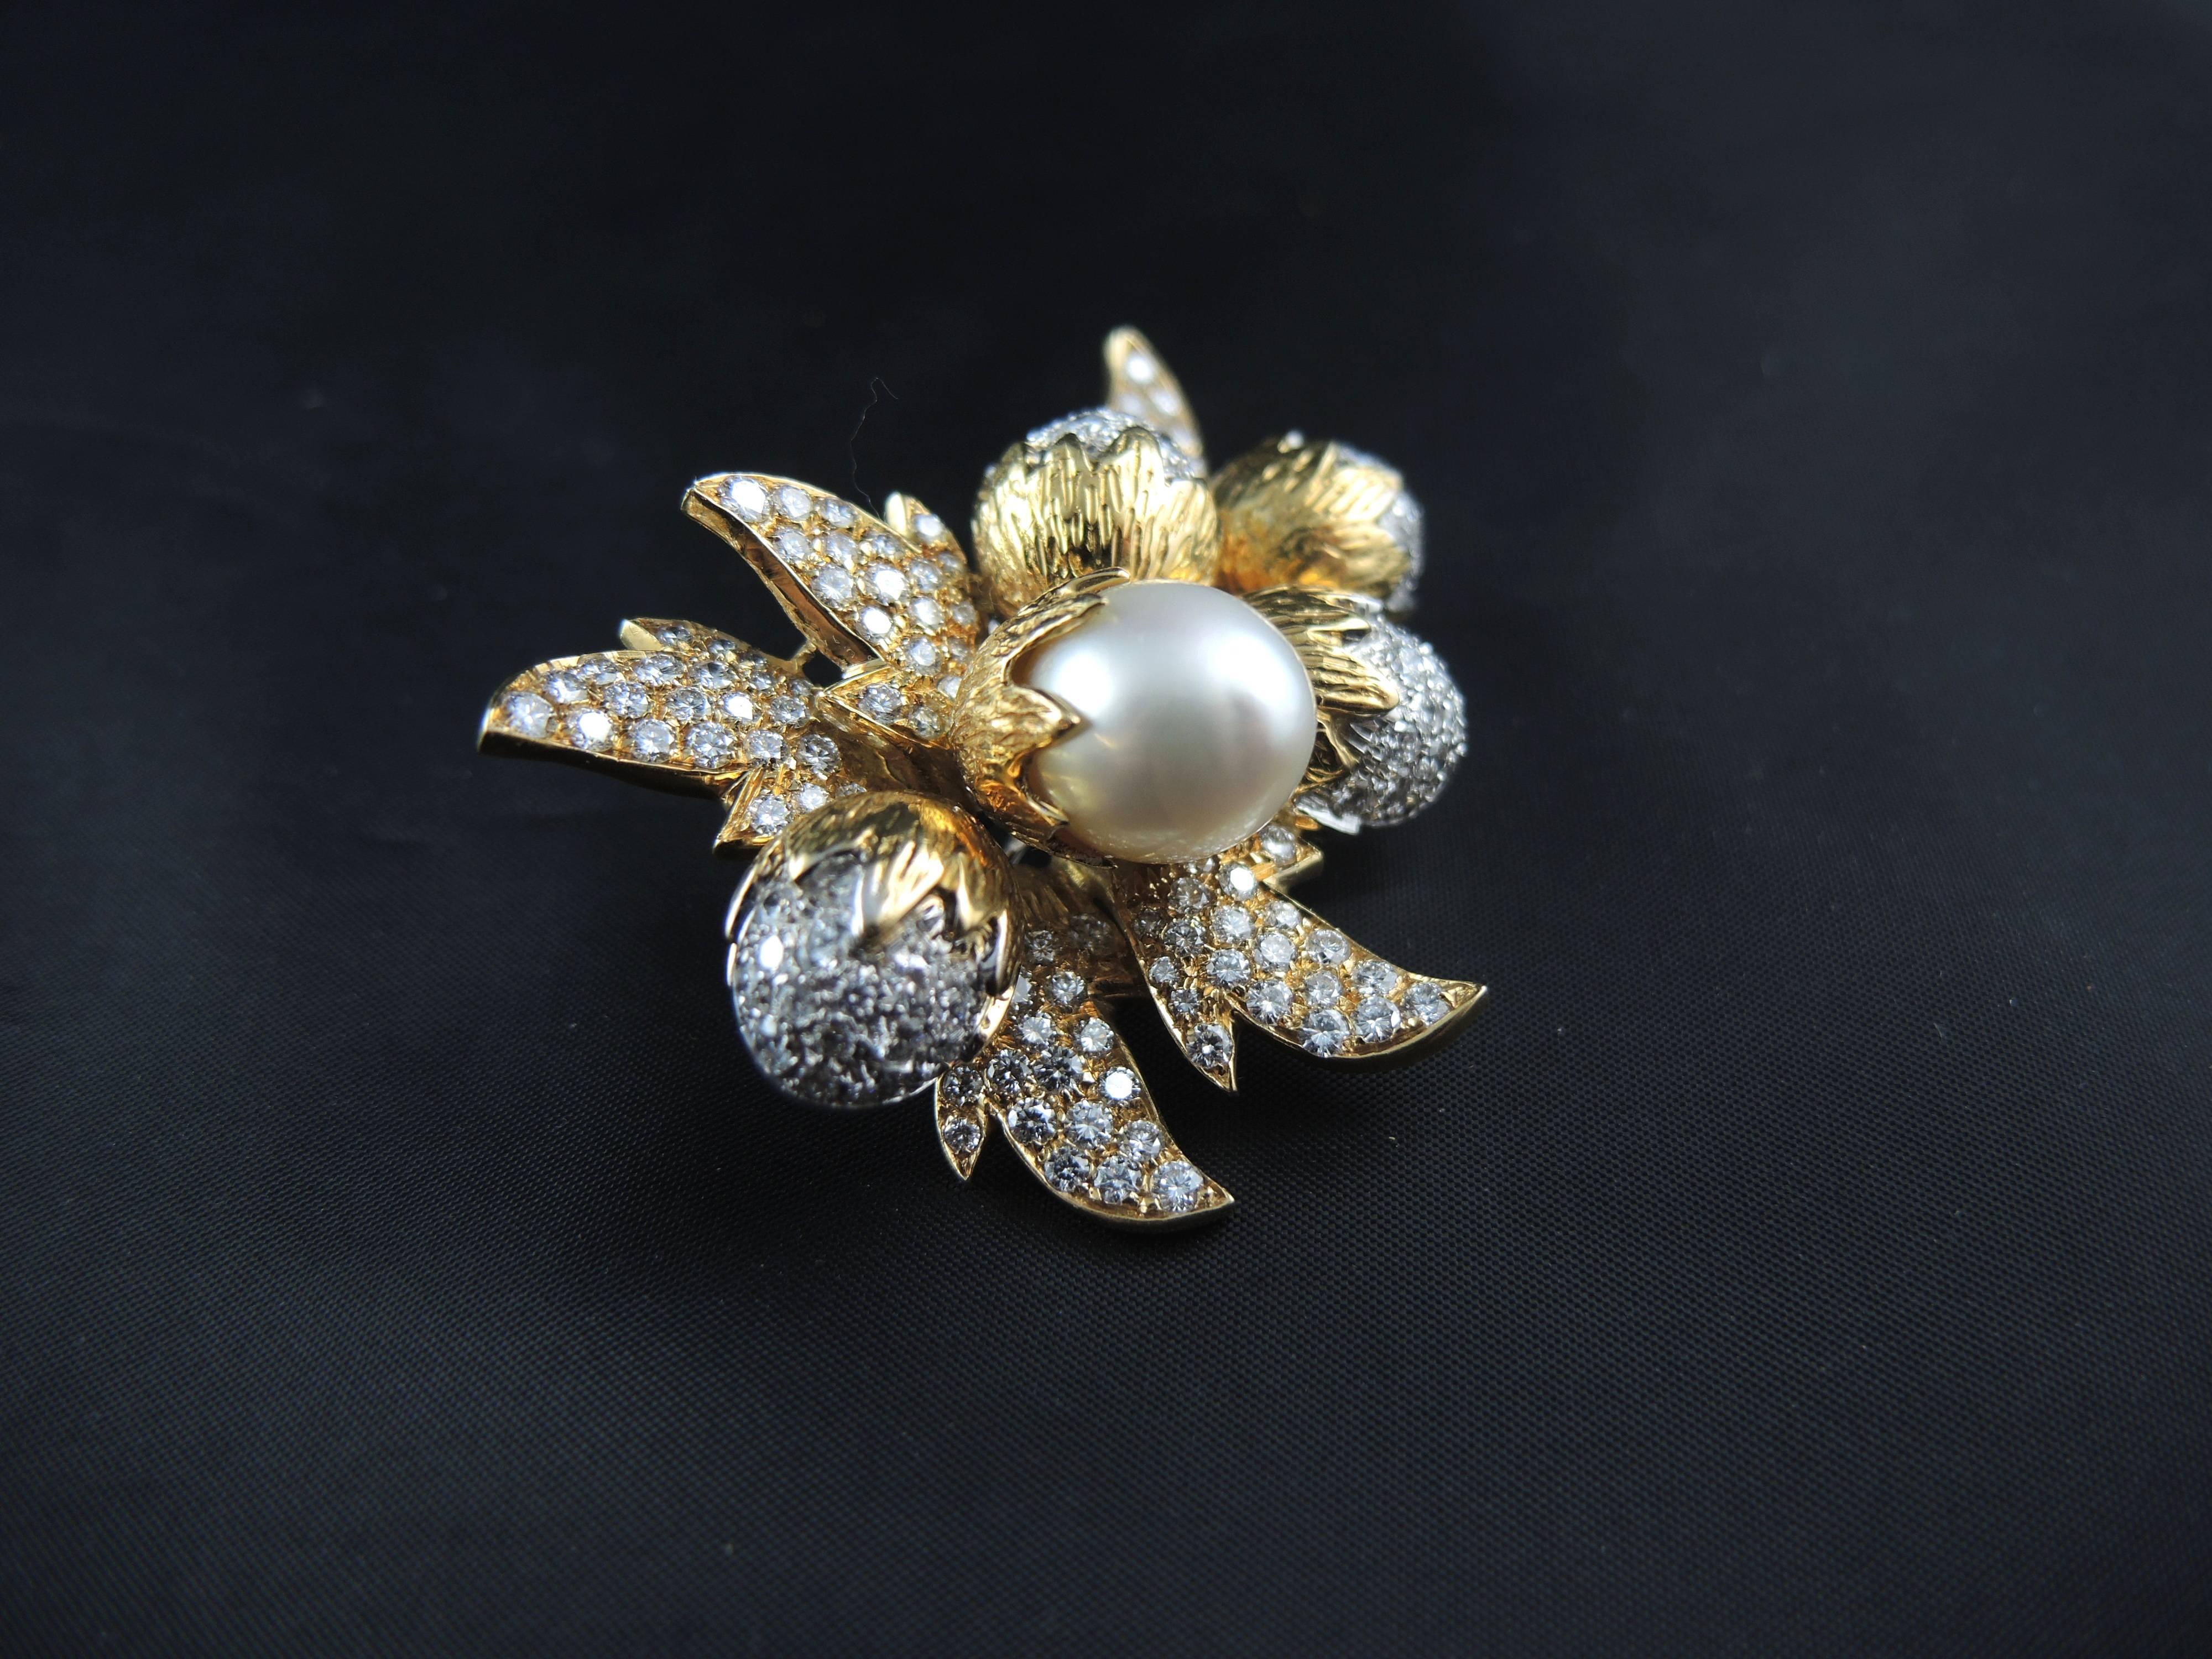 Incredible 18kt yellow and white gold hazelnuts' acorns and leaves brooch (quality mark: owl) set with modern brilliant cut diamonds, total weight apx 6,50 Cts, and a stunning pearl from the south sea.
A pair of earrings similar to this model is